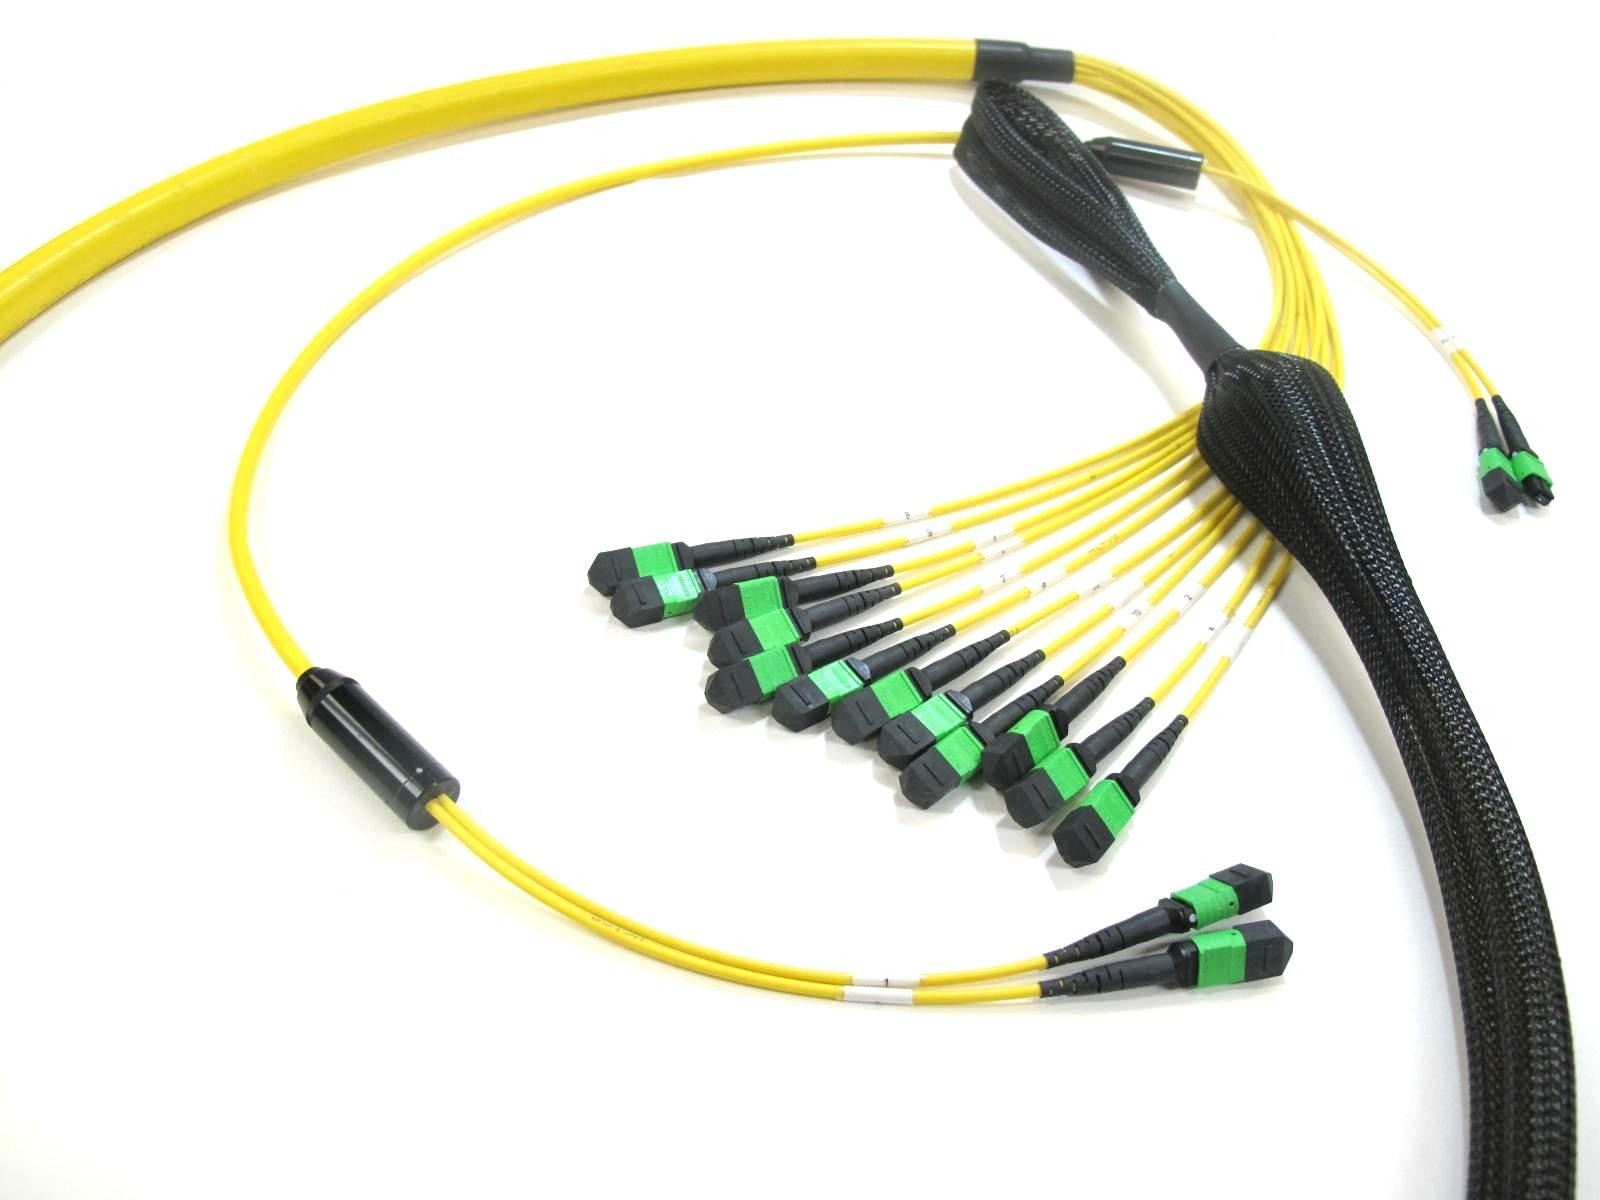  MPO To MPO Trunk Cable , Telecom Single Mode Fiber Optic Cable High Bandwidth 12 - 288 Fibers Manufactures